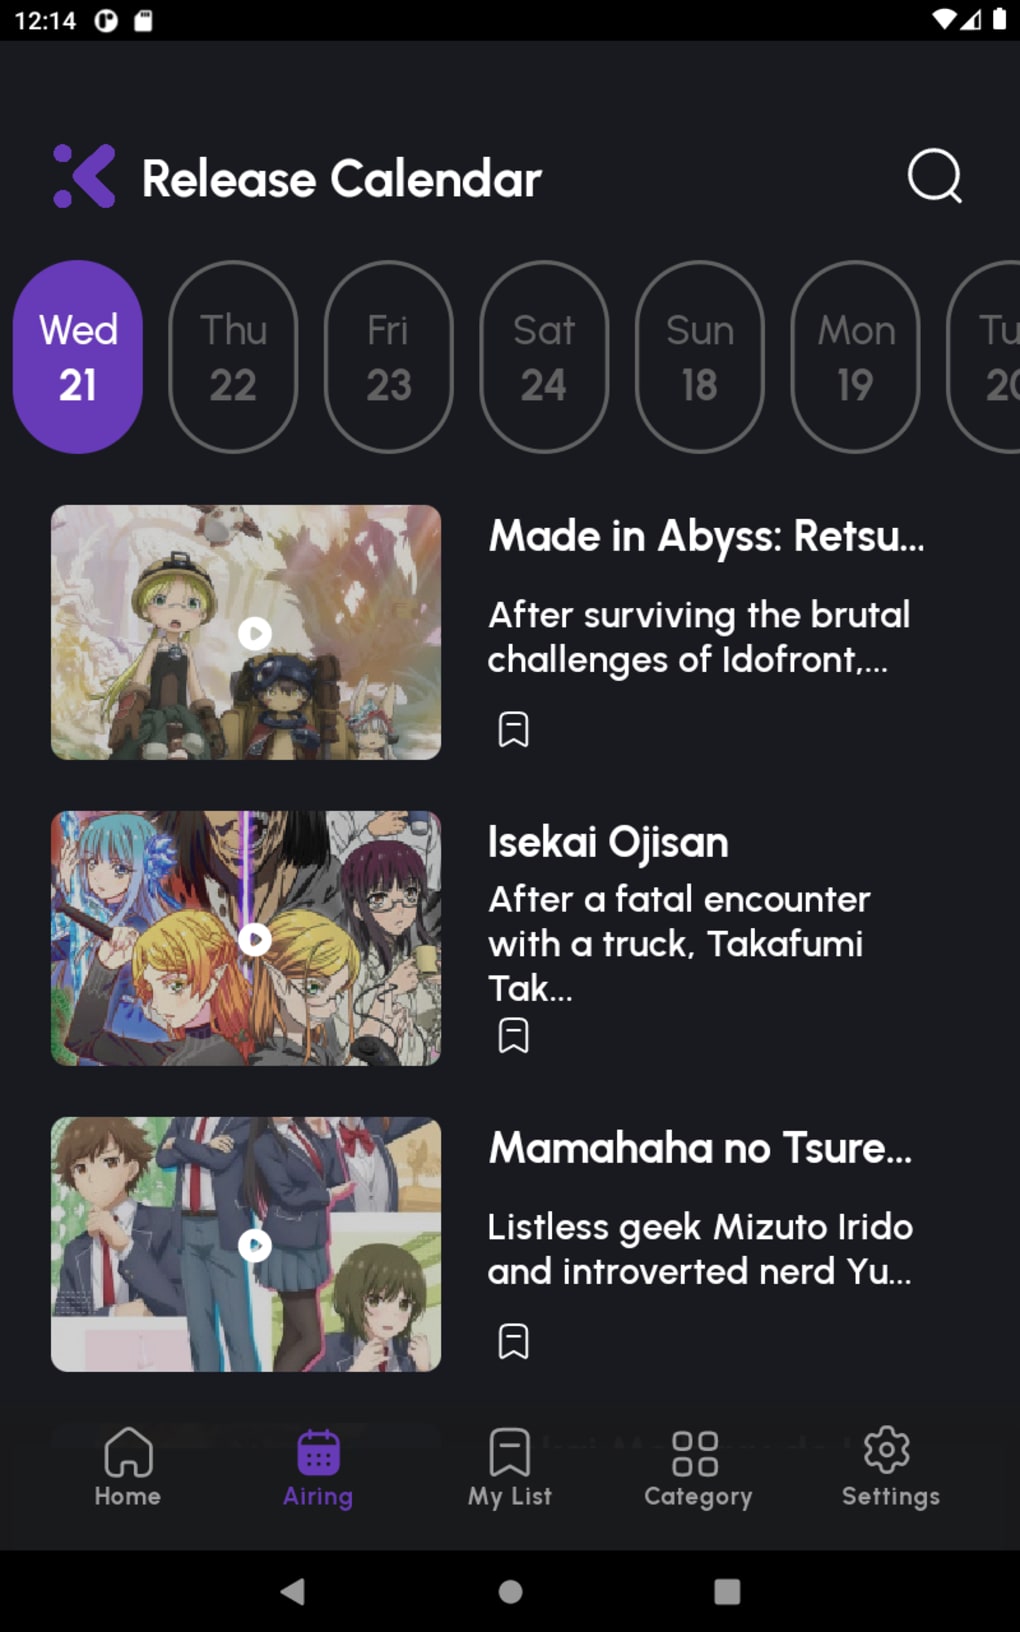 Top 5 Anime streaming applications for android  YugaTech  Philippines  Tech News  Reviews